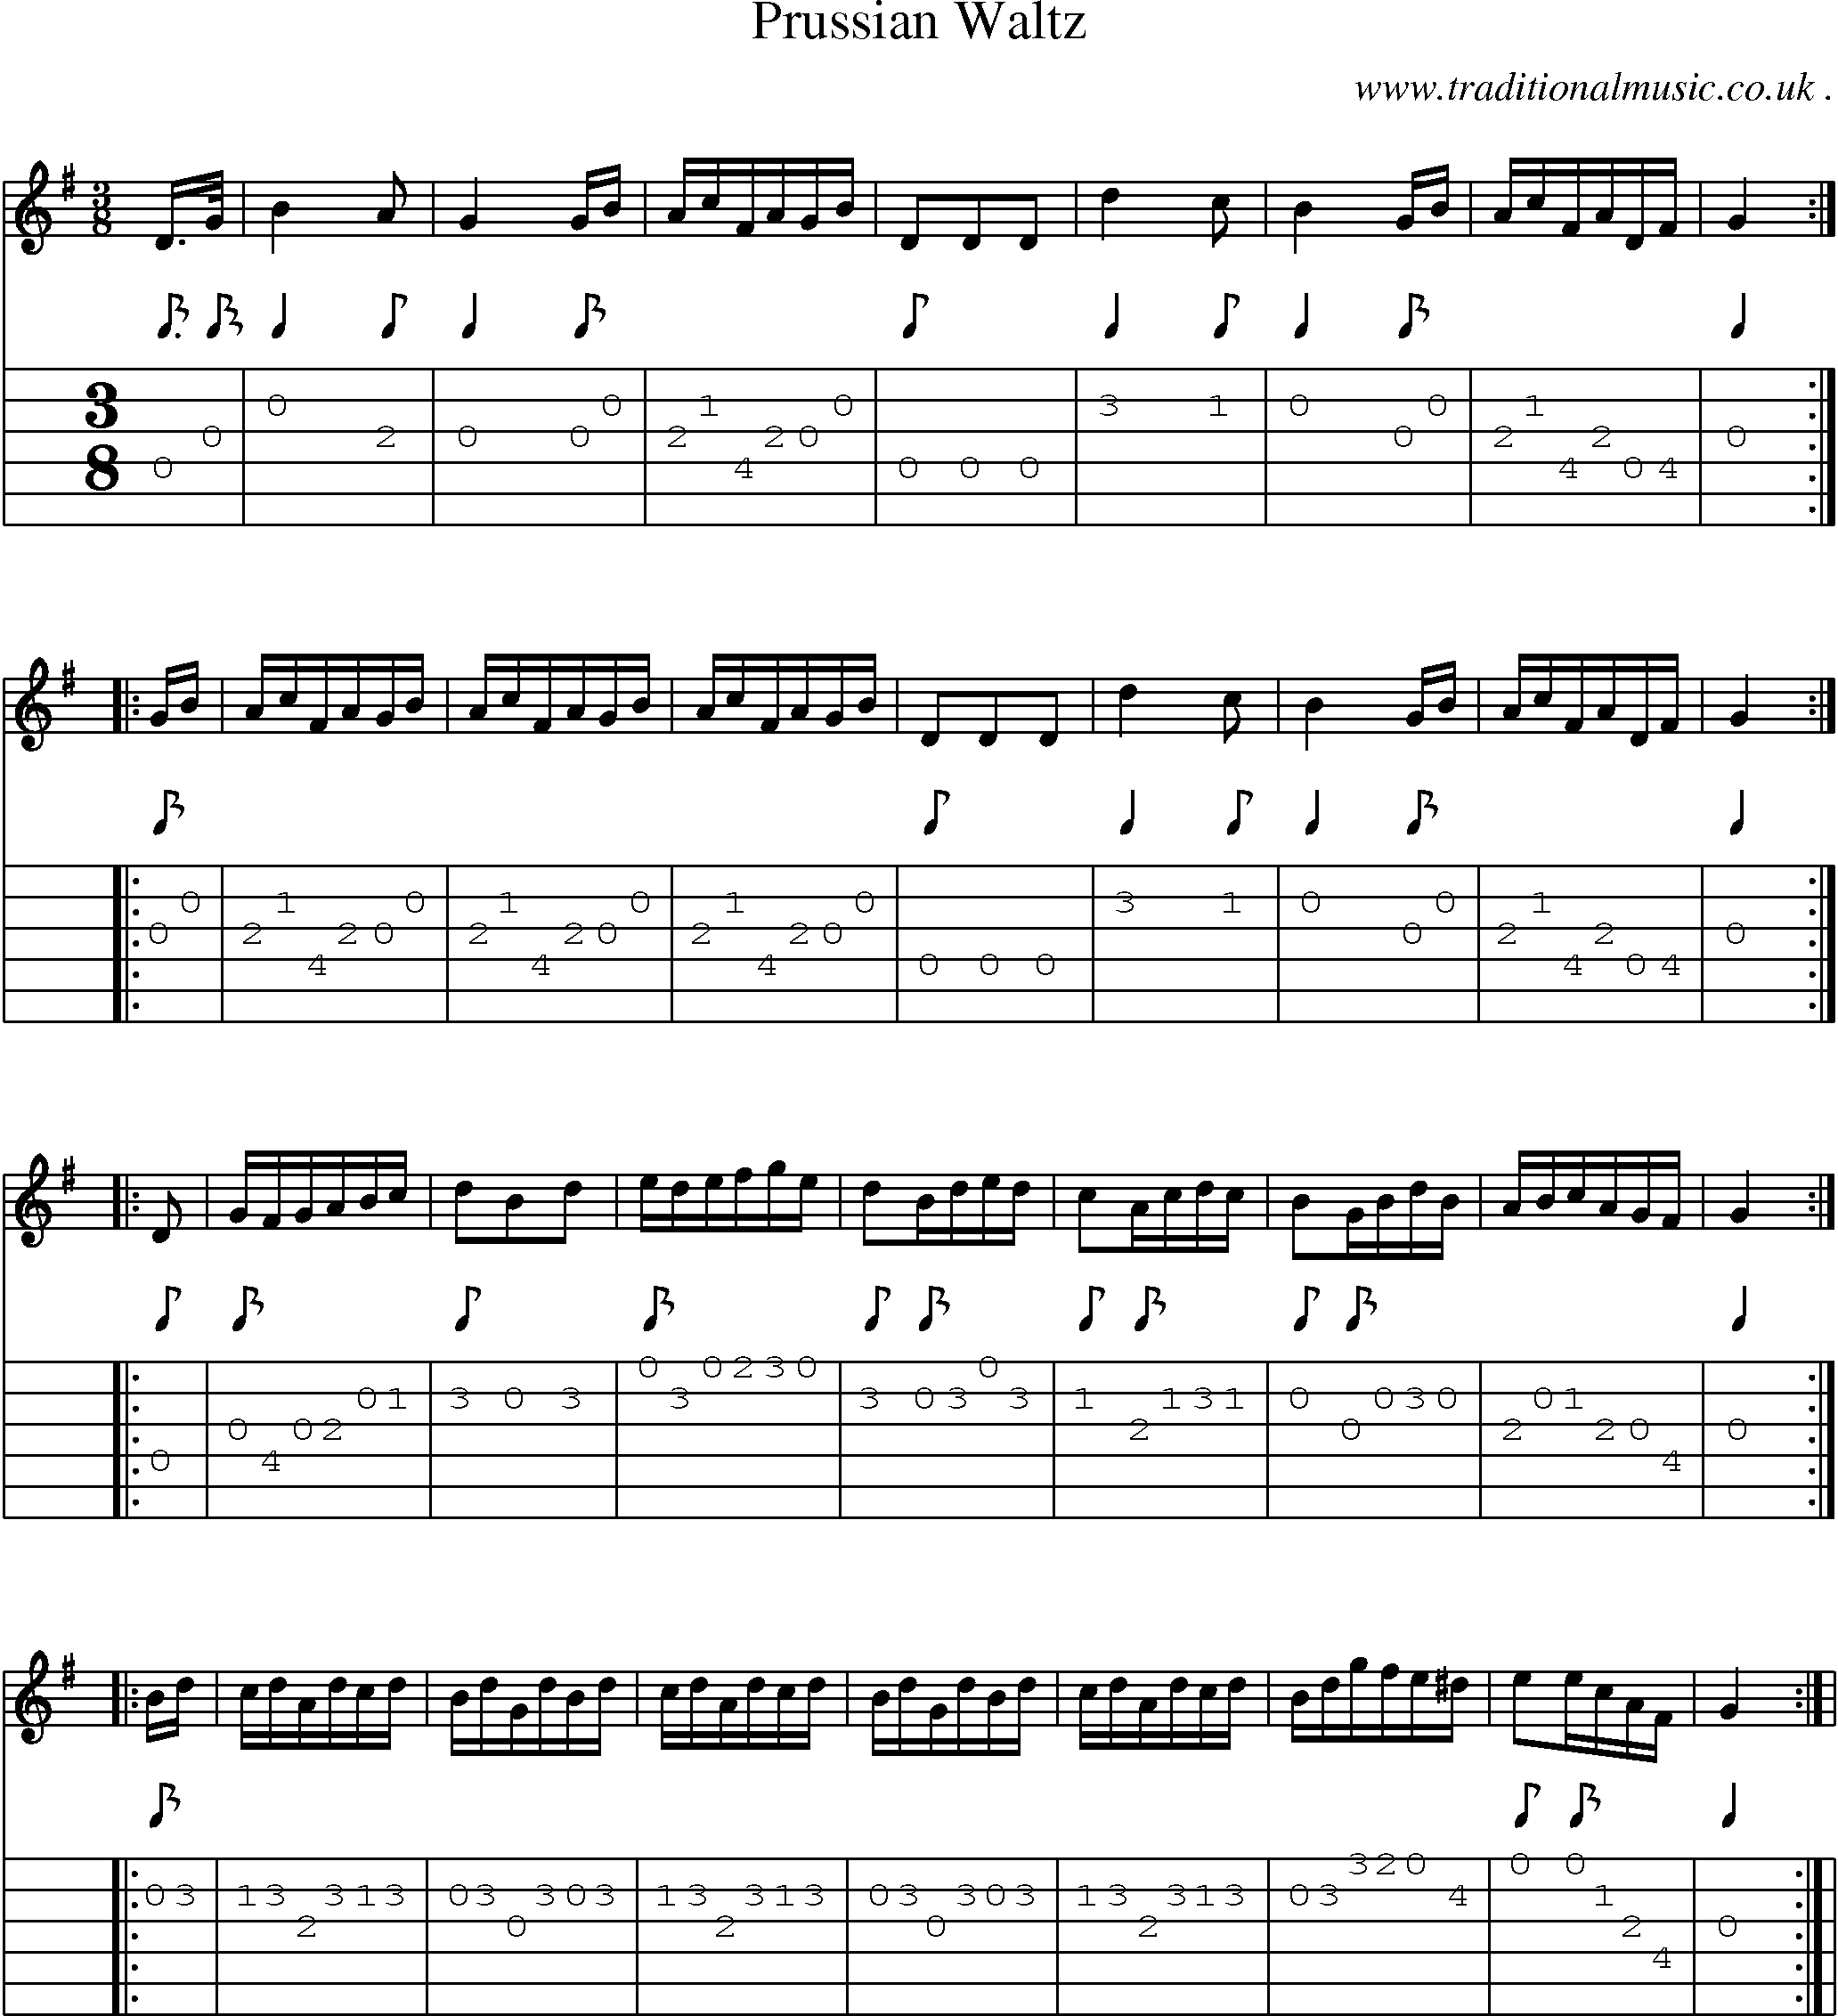 Sheet-Music and Guitar Tabs for Prussian Waltz